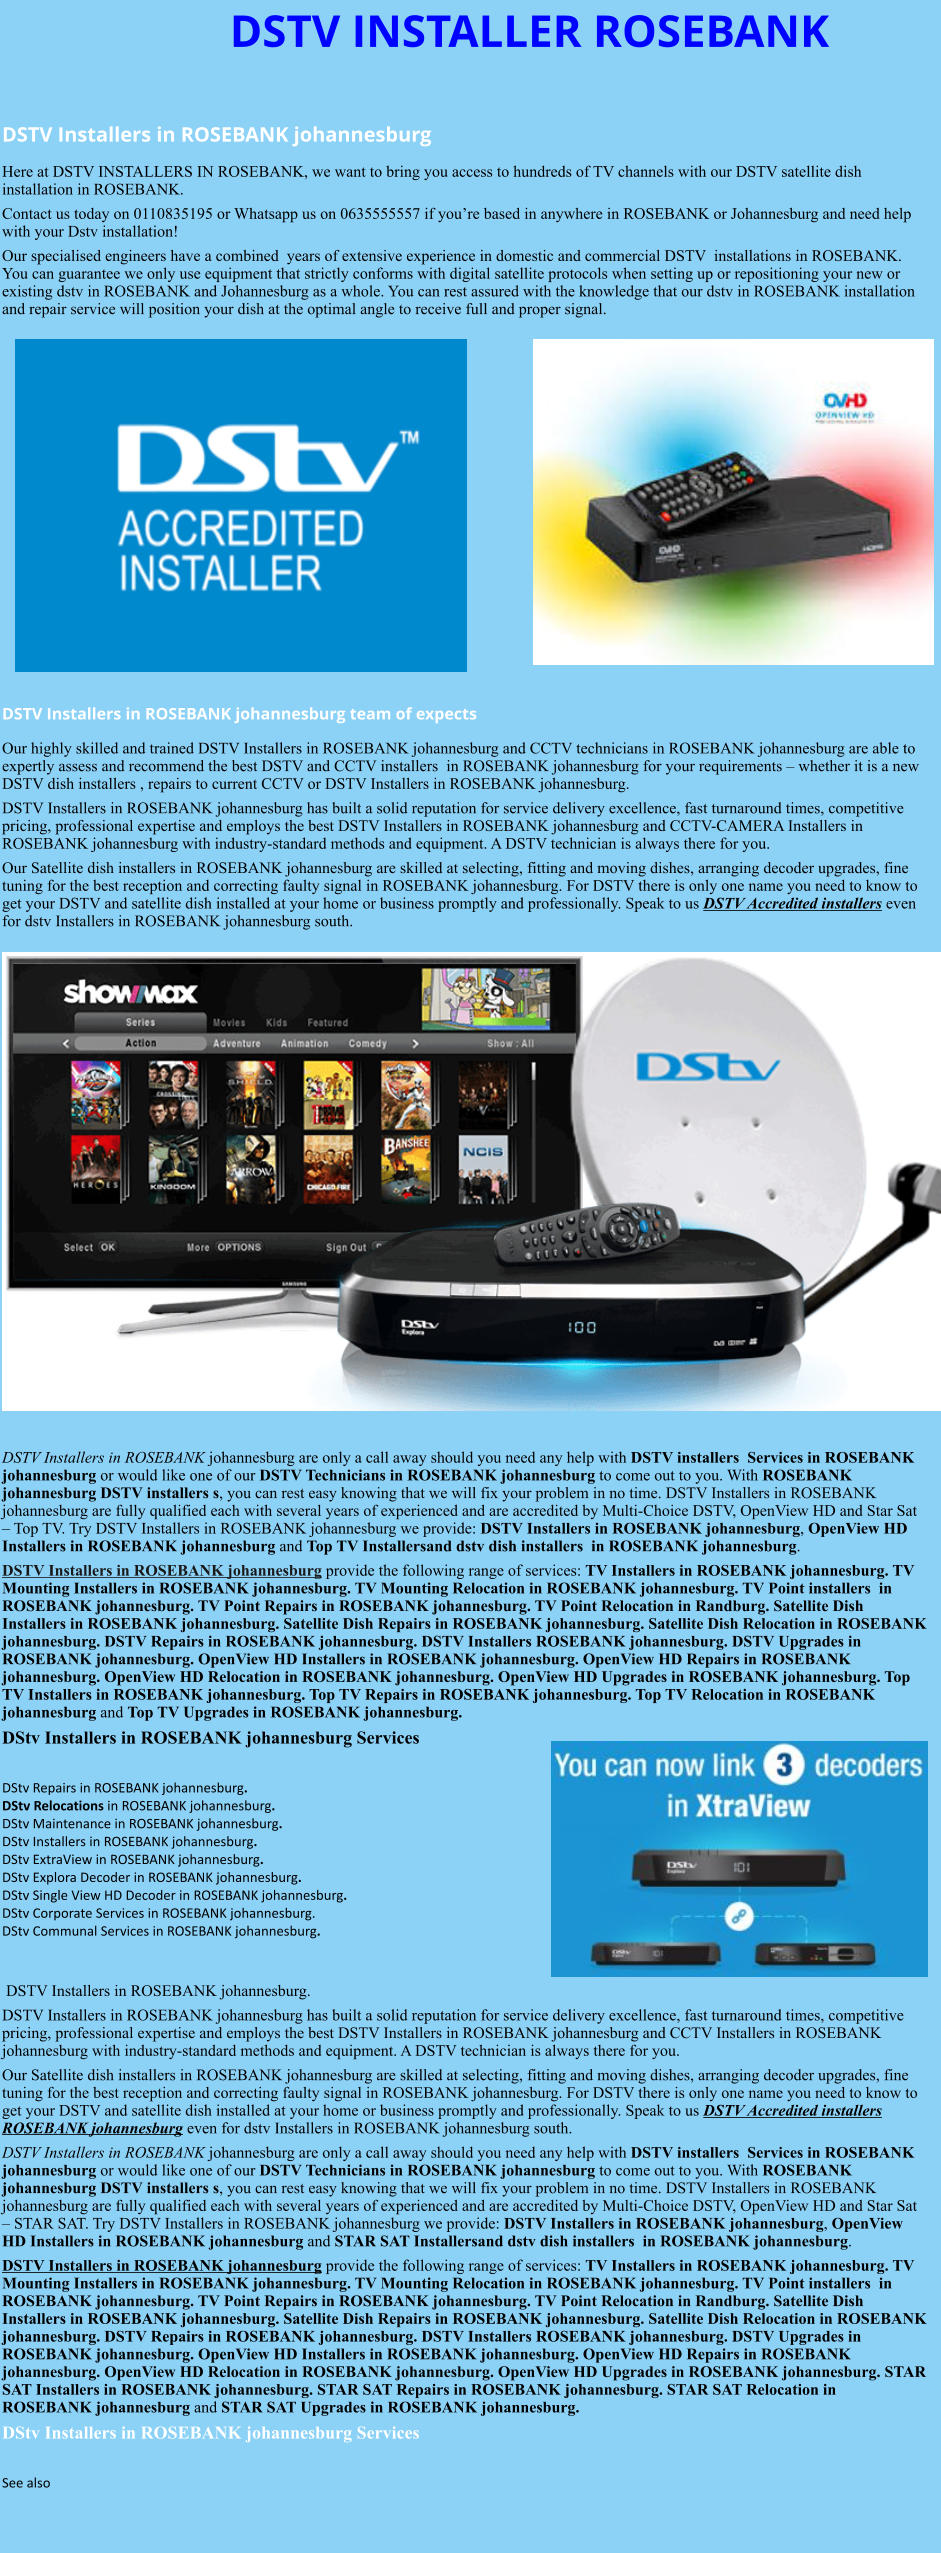 DSTV INSTALLER ROSEBANK  DSTV Installers in ROSEBANK johannesburg  Here at DSTV INSTALLERS IN ROSEBANK, we want to bring you access to hundreds of TV channels with our DSTV satellite dish installation in ROSEBANK. Contact us today on 0110835195 or Whatsapp us on 0635555557 if you’re based in anywhere in ROSEBANK or Johannesburg and need help with your Dstv installation! Our specialised engineers have a combined  years of extensive experience in domestic and commercial DSTV  installations in ROSEBANK. You can guarantee we only use equipment that strictly conforms with digital satellite protocols when setting up or repositioning your new or existing dstv in ROSEBANK and Johannesburg as a whole. You can rest assured with the knowledge that our dstv in ROSEBANK installation and repair service will position your dish at the optimal angle to receive full and proper signal.                DSTV Installers in ROSEBANK johannesburg team of expects Our highly skilled and trained DSTV Installers in ROSEBANK johannesburg and CCTV technicians in ROSEBANK johannesburg are able to expertly assess and recommend the best DSTV and CCTV installers  in ROSEBANK johannesburg for your requirements – whether it is a new DSTV dish installers , repairs to current CCTV or DSTV Installers in ROSEBANK johannesburg. DSTV Installers in ROSEBANK johannesburg has built a solid reputation for service delivery excellence, fast turnaround times, competitive pricing, professional expertise and employs the best DSTV Installers in ROSEBANK johannesburg and CCTV-CAMERA Installers in ROSEBANK johannesburg with industry-standard methods and equipment. A DSTV technician is always there for you. Our Satellite dish installers in ROSEBANK johannesburg are skilled at selecting, fitting and moving dishes, arranging decoder upgrades, fine tuning for the best reception and correcting faulty signal in ROSEBANK johannesburg. For DSTV there is only one name you need to know to get your DSTV and satellite dish installed at your home or business promptly and professionally. Speak to us DSTV Accredited installers even for dstv Installers in ROSEBANK johannesburg south.                      DSTV Installers in ROSEBANK johannesburg are only a call away should you need any help with DSTV installers  Services in ROSEBANK johannesburg or would like one of our DSTV Technicians in ROSEBANK johannesburg to come out to you. With ROSEBANK johannesburg DSTV installers s, you can rest easy knowing that we will fix your problem in no time. DSTV Installers in ROSEBANK johannesburg are fully qualified each with several years of experienced and are accredited by Multi-Choice DSTV, OpenView HD and Star Sat – Top TV. Try DSTV Installers in ROSEBANK johannesburg we provide: DSTV Installers in ROSEBANK johannesburg, OpenView HD Installers in ROSEBANK johannesburg and Top TV Installersand dstv dish installers  in ROSEBANK johannesburg. DSTV Installers in ROSEBANK johannesburg provide the following range of services: TV Installers in ROSEBANK johannesburg. TV Mounting Installers in ROSEBANK johannesburg. TV Mounting Relocation in ROSEBANK johannesburg. TV Point installers  in ROSEBANK johannesburg. TV Point Repairs in ROSEBANK johannesburg. TV Point Relocation in Randburg. Satellite Dish Installers in ROSEBANK johannesburg. Satellite Dish Repairs in ROSEBANK johannesburg. Satellite Dish Relocation in ROSEBANK johannesburg. DSTV Repairs in ROSEBANK johannesburg. DSTV Installers ROSEBANK johannesburg. DSTV Upgrades in ROSEBANK johannesburg. OpenView HD Installers in ROSEBANK johannesburg. OpenView HD Repairs in ROSEBANK johannesburg. OpenView HD Relocation in ROSEBANK johannesburg. OpenView HD Upgrades in ROSEBANK johannesburg. Top TV Installers in ROSEBANK johannesburg. Top TV Repairs in ROSEBANK johannesburg. Top TV Relocation in ROSEBANK johannesburg and Top TV Upgrades in ROSEBANK johannesburg. DStv Installers in ROSEBANK johannesburg Services  DStv Repairs in ROSEBANK johannesburg.  DStv Relocations in ROSEBANK johannesburg.  DStv Maintenance in ROSEBANK johannesburg. DStv Installers in ROSEBANK johannesburg. DStv ExtraView in ROSEBANK johannesburg. DStv Explora Decoder in ROSEBANK johannesburg. DStv Single View HD Decoder in ROSEBANK johannesburg. DStv Corporate Services in ROSEBANK johannesburg. DStv Communal Services in ROSEBANK johannesburg.    DSTV Installers in ROSEBANK johannesburg. DSTV Installers in ROSEBANK johannesburg has built a solid reputation for service delivery excellence, fast turnaround times, competitive pricing, professional expertise and employs the best DSTV Installers in ROSEBANK johannesburg and CCTV Installers in ROSEBANK johannesburg with industry-standard methods and equipment. A DSTV technician is always there for you. Our Satellite dish installers in ROSEBANK johannesburg are skilled at selecting, fitting and moving dishes, arranging decoder upgrades, fine tuning for the best reception and correcting faulty signal in ROSEBANK johannesburg. For DSTV there is only one name you need to know to get your DSTV and satellite dish installed at your home or business promptly and professionally. Speak to us DSTV Accredited installers ROSEBANK johannesburg even for dstv Installers in ROSEBANK johannesburg south. DSTV Installers in ROSEBANK johannesburg are only a call away should you need any help with DSTV installers  Services in ROSEBANK johannesburg or would like one of our DSTV Technicians in ROSEBANK johannesburg to come out to you. With ROSEBANK johannesburg DSTV installers s, you can rest easy knowing that we will fix your problem in no time. DSTV Installers in ROSEBANK johannesburg are fully qualified each with several years of experienced and are accredited by Multi-Choice DSTV, OpenView HD and Star Sat – STAR SAT. Try DSTV Installers in ROSEBANK johannesburg we provide: DSTV Installers in ROSEBANK johannesburg, OpenView HD Installers in ROSEBANK johannesburg and STAR SAT Installersand dstv dish installers  in ROSEBANK johannesburg. DSTV Installers in ROSEBANK johannesburg provide the following range of services: TV Installers in ROSEBANK johannesburg. TV Mounting Installers in ROSEBANK johannesburg. TV Mounting Relocation in ROSEBANK johannesburg. TV Point installers  in ROSEBANK johannesburg. TV Point Repairs in ROSEBANK johannesburg. TV Point Relocation in Randburg. Satellite Dish Installers in ROSEBANK johannesburg. Satellite Dish Repairs in ROSEBANK johannesburg. Satellite Dish Relocation in ROSEBANK johannesburg. DSTV Repairs in ROSEBANK johannesburg. DSTV Installers ROSEBANK johannesburg. DSTV Upgrades in ROSEBANK johannesburg. OpenView HD Installers in ROSEBANK johannesburg. OpenView HD Repairs in ROSEBANK johannesburg. OpenView HD Relocation in ROSEBANK johannesburg. OpenView HD Upgrades in ROSEBANK johannesburg. STAR SAT Installers in ROSEBANK johannesburg. STAR SAT Repairs in ROSEBANK johannesburg. STAR SAT Relocation in ROSEBANK johannesburg and STAR SAT Upgrades in ROSEBANK johannesburg. DStv Installers in ROSEBANK johannesburg Services  See also